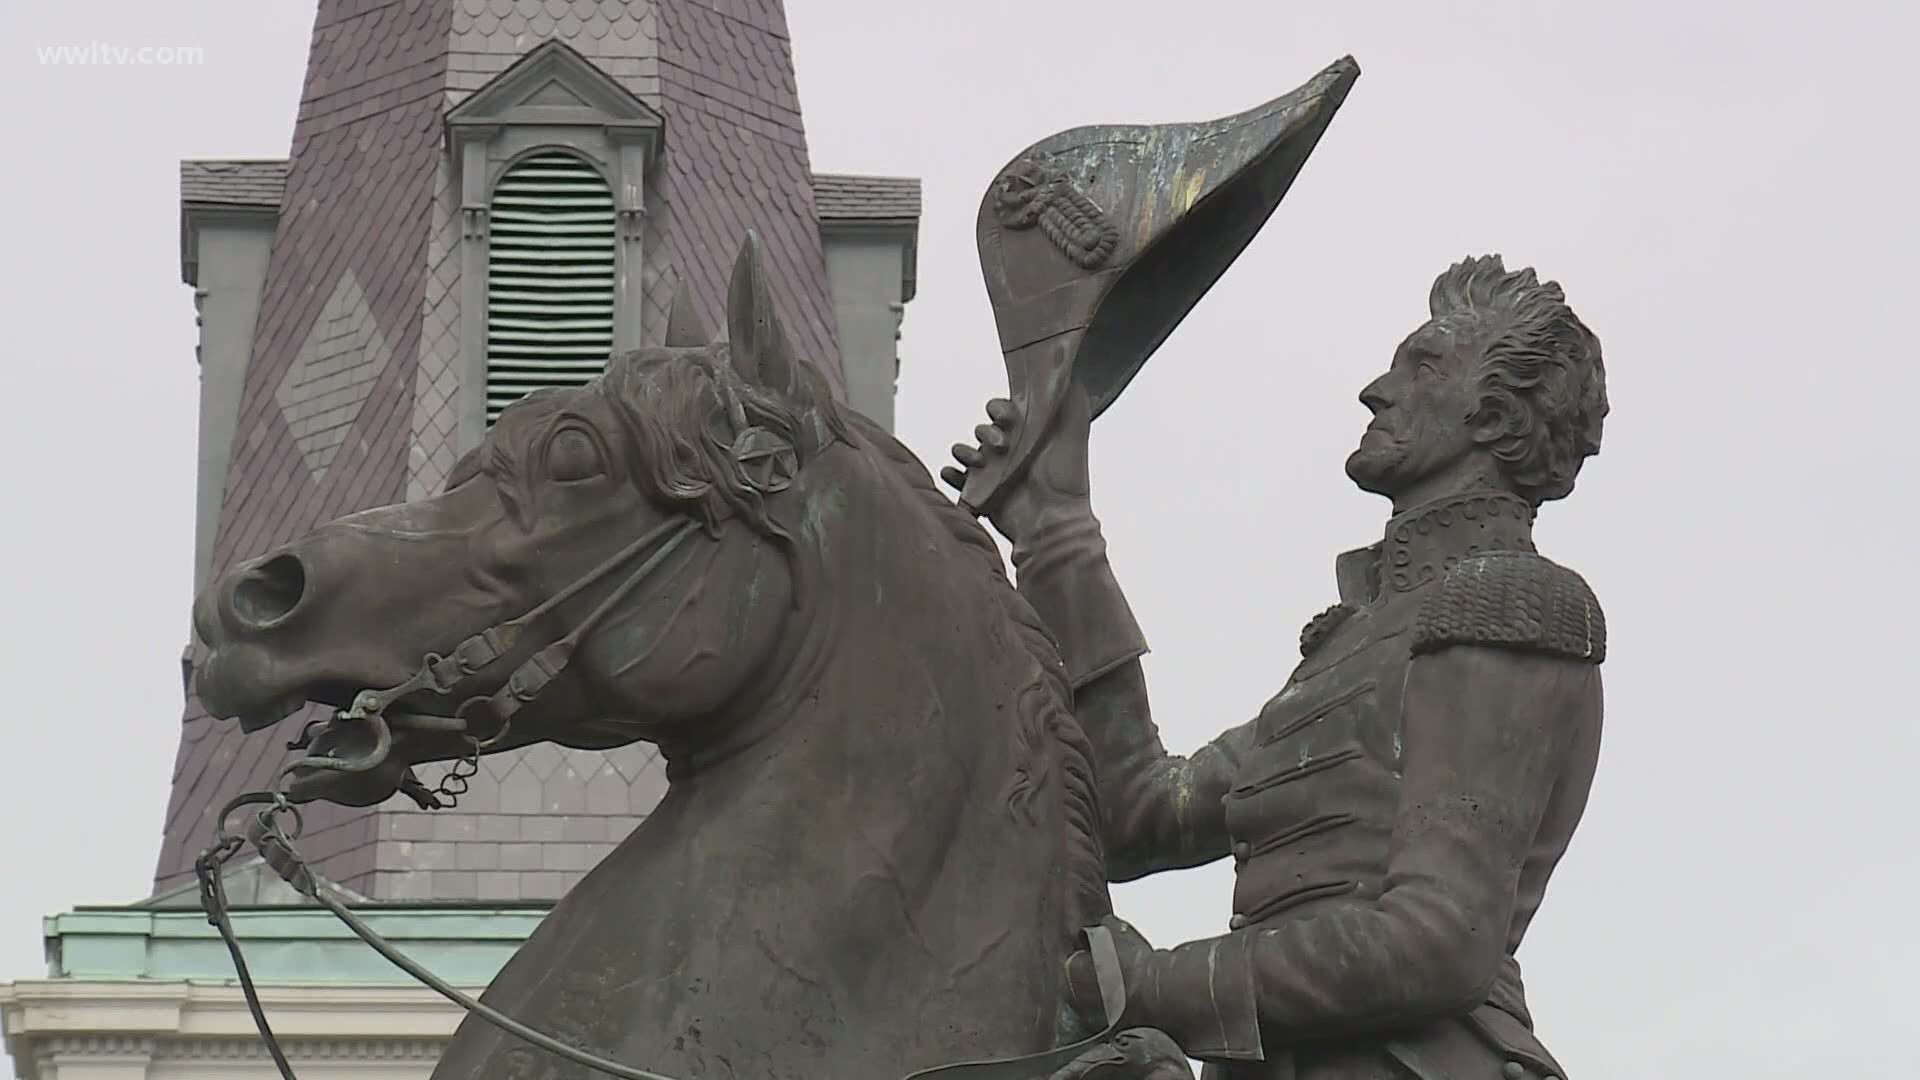 The group will push the New Orleans City Council to remove the iconic, controversial statue form Jackson Square by the end of the month.